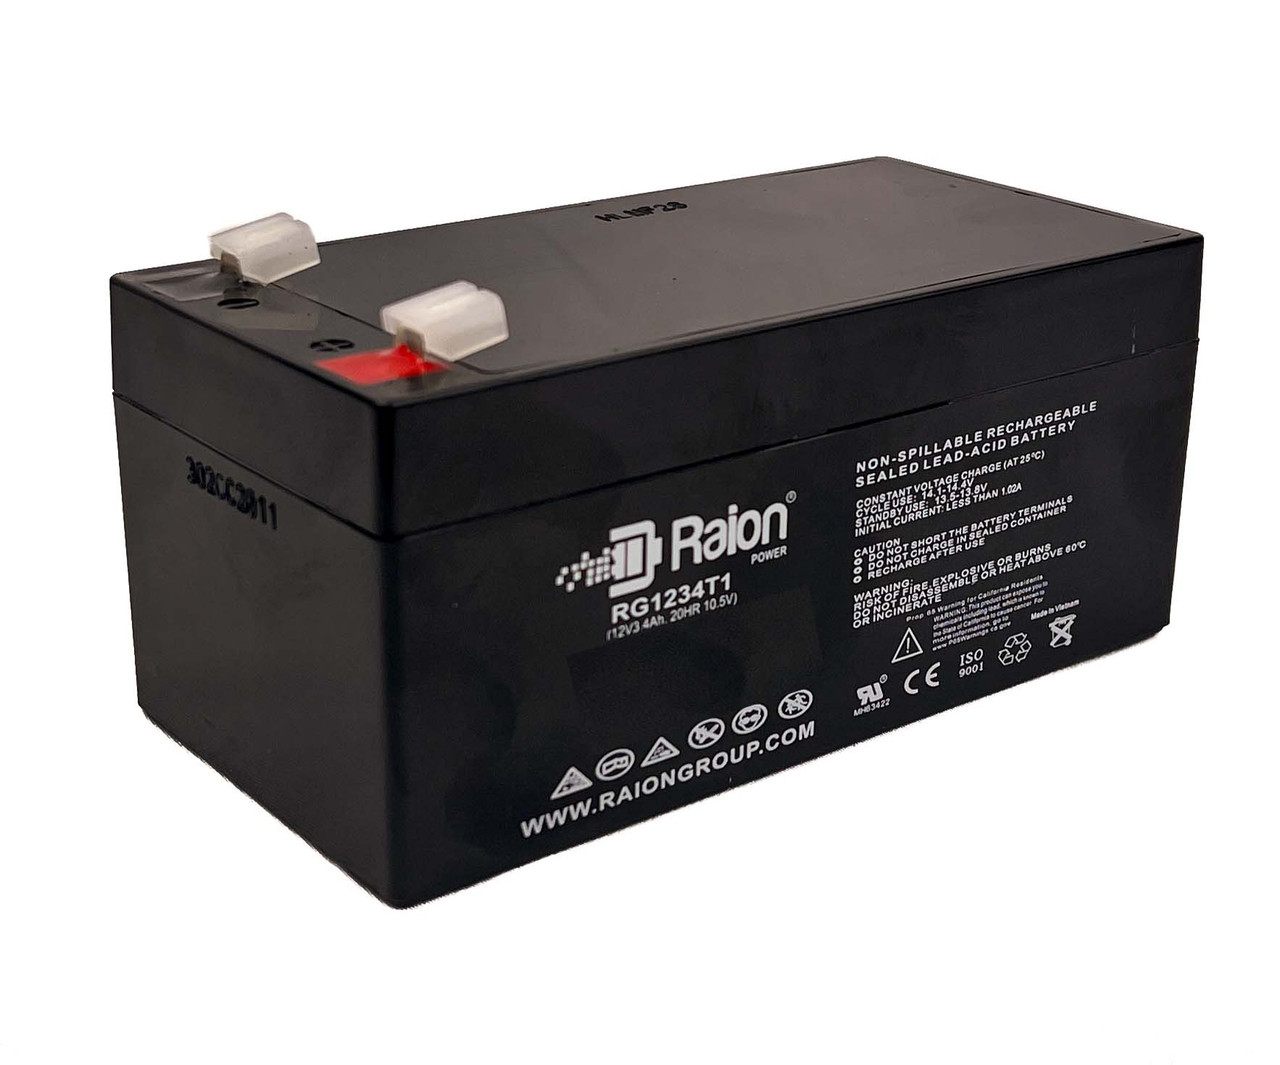 Raion Power 12V 3.4Ah Non-Spillable Replacement Battery for KAGE MF12V3.3Ah